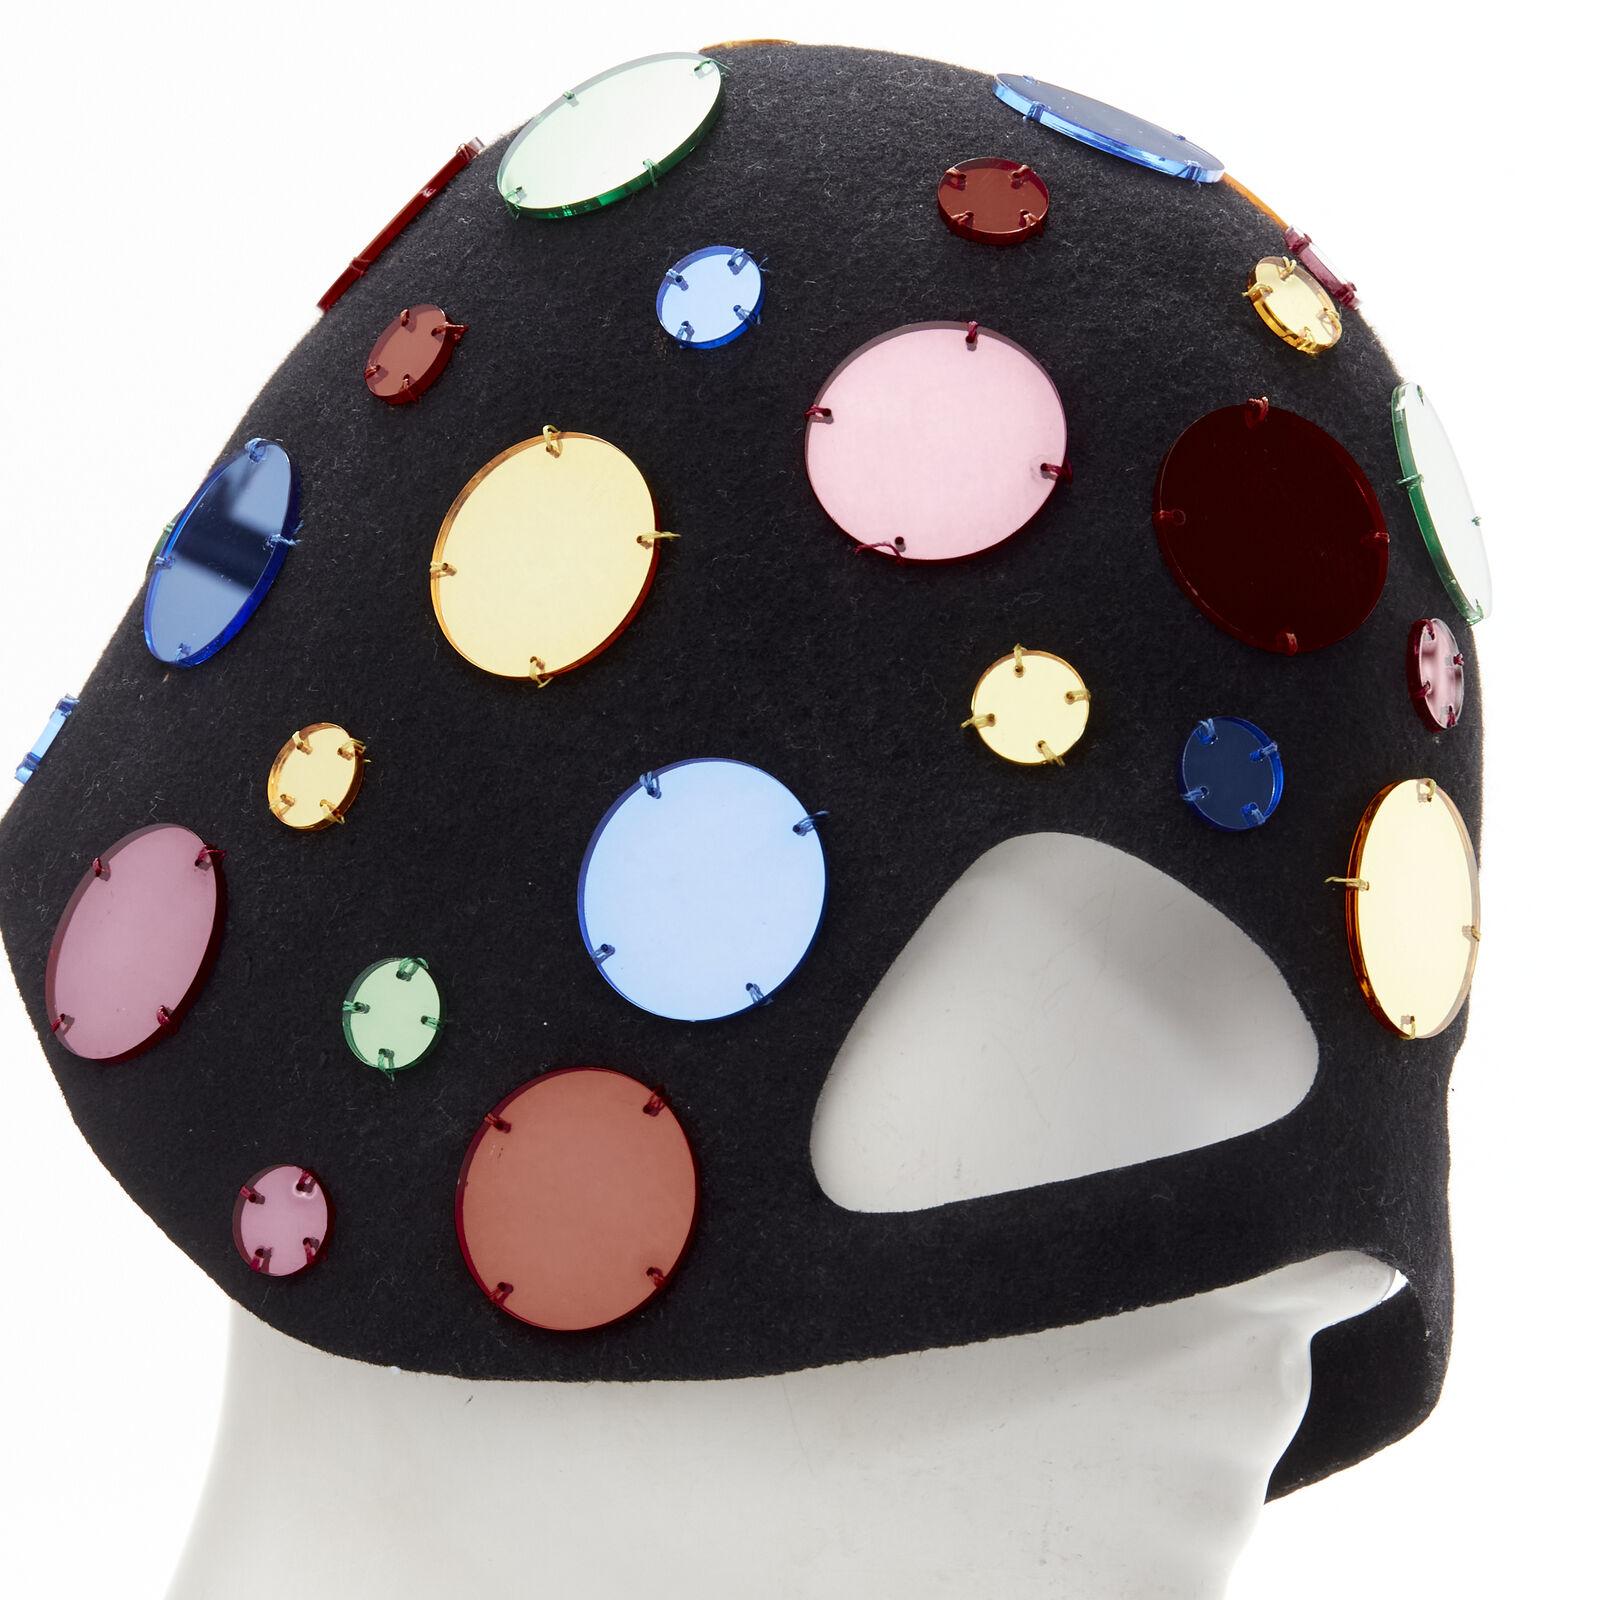 rare GUCCI Alessandro Michele Runway black wool felt embellished mask felt hat
Reference: TGAS/C01511
Brand: Gucci
Designer: Alessandro Michele
Model: 590047 HI32 1000
Collection: Runway
Material: 100% Wool
Color: Black, Multicolour
Pattern: